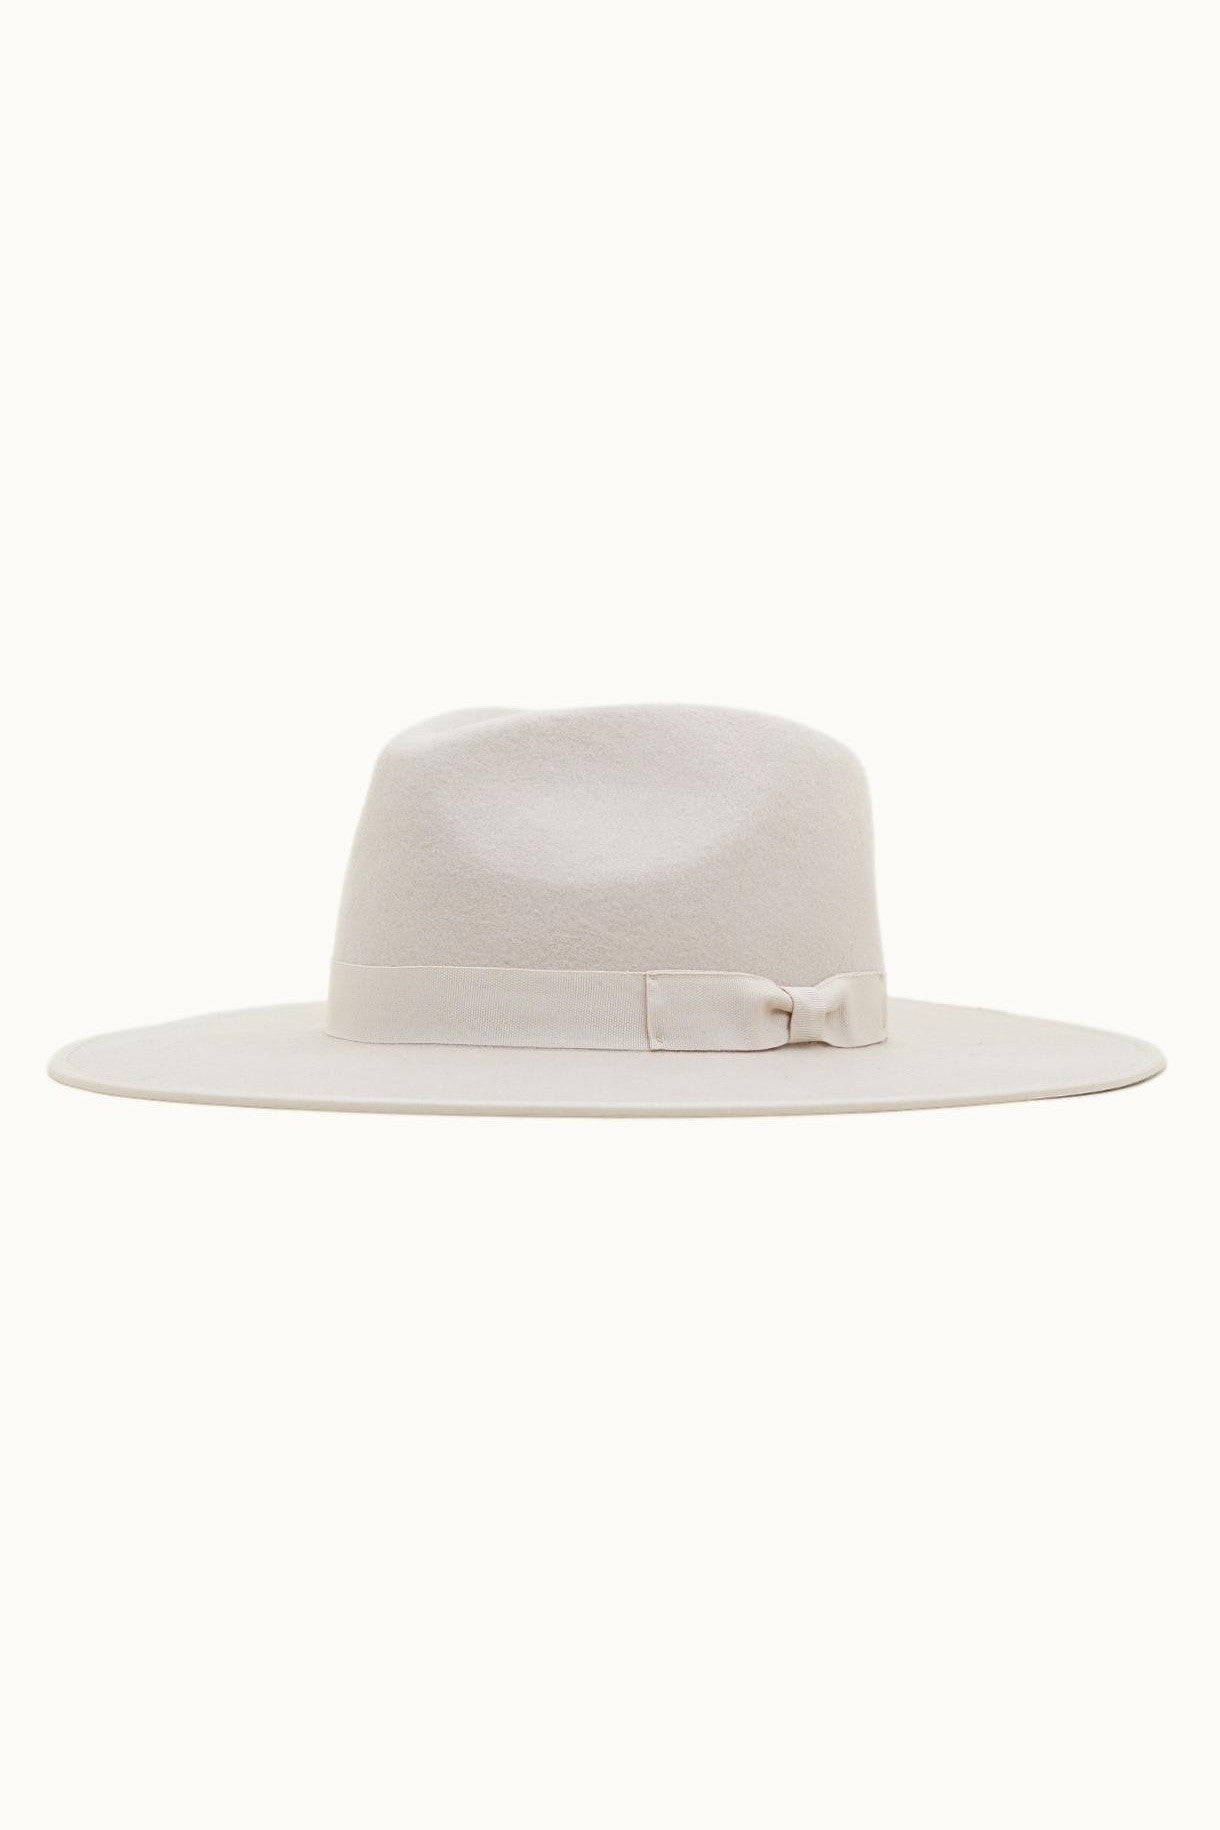 The Remi Rancher Hat